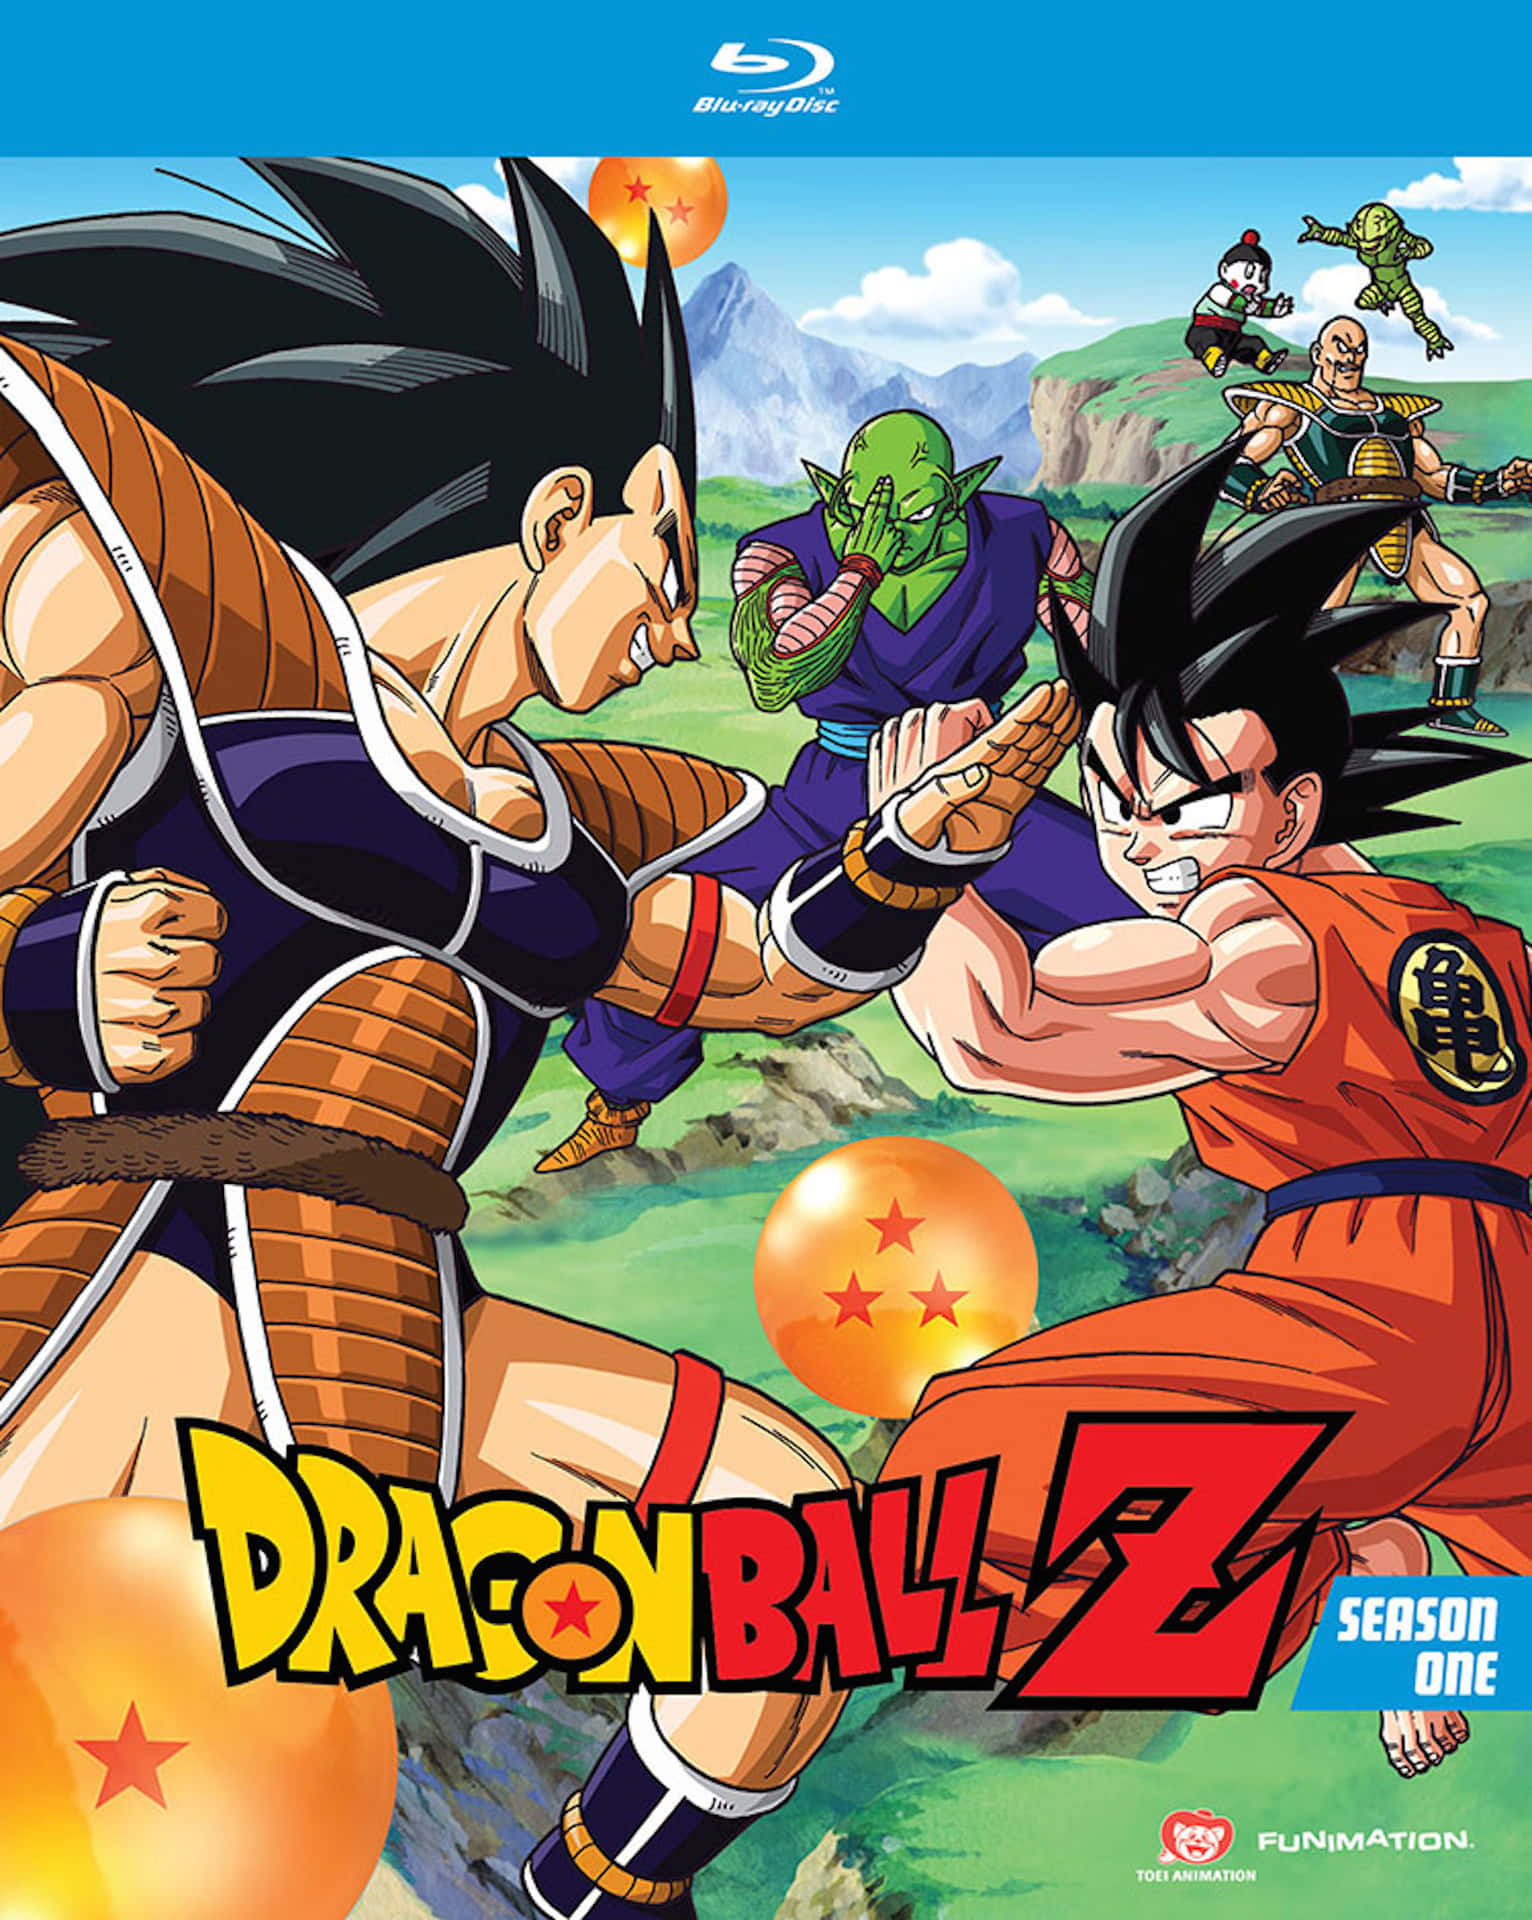 Experience the Epic Action and Adventure of DBZ